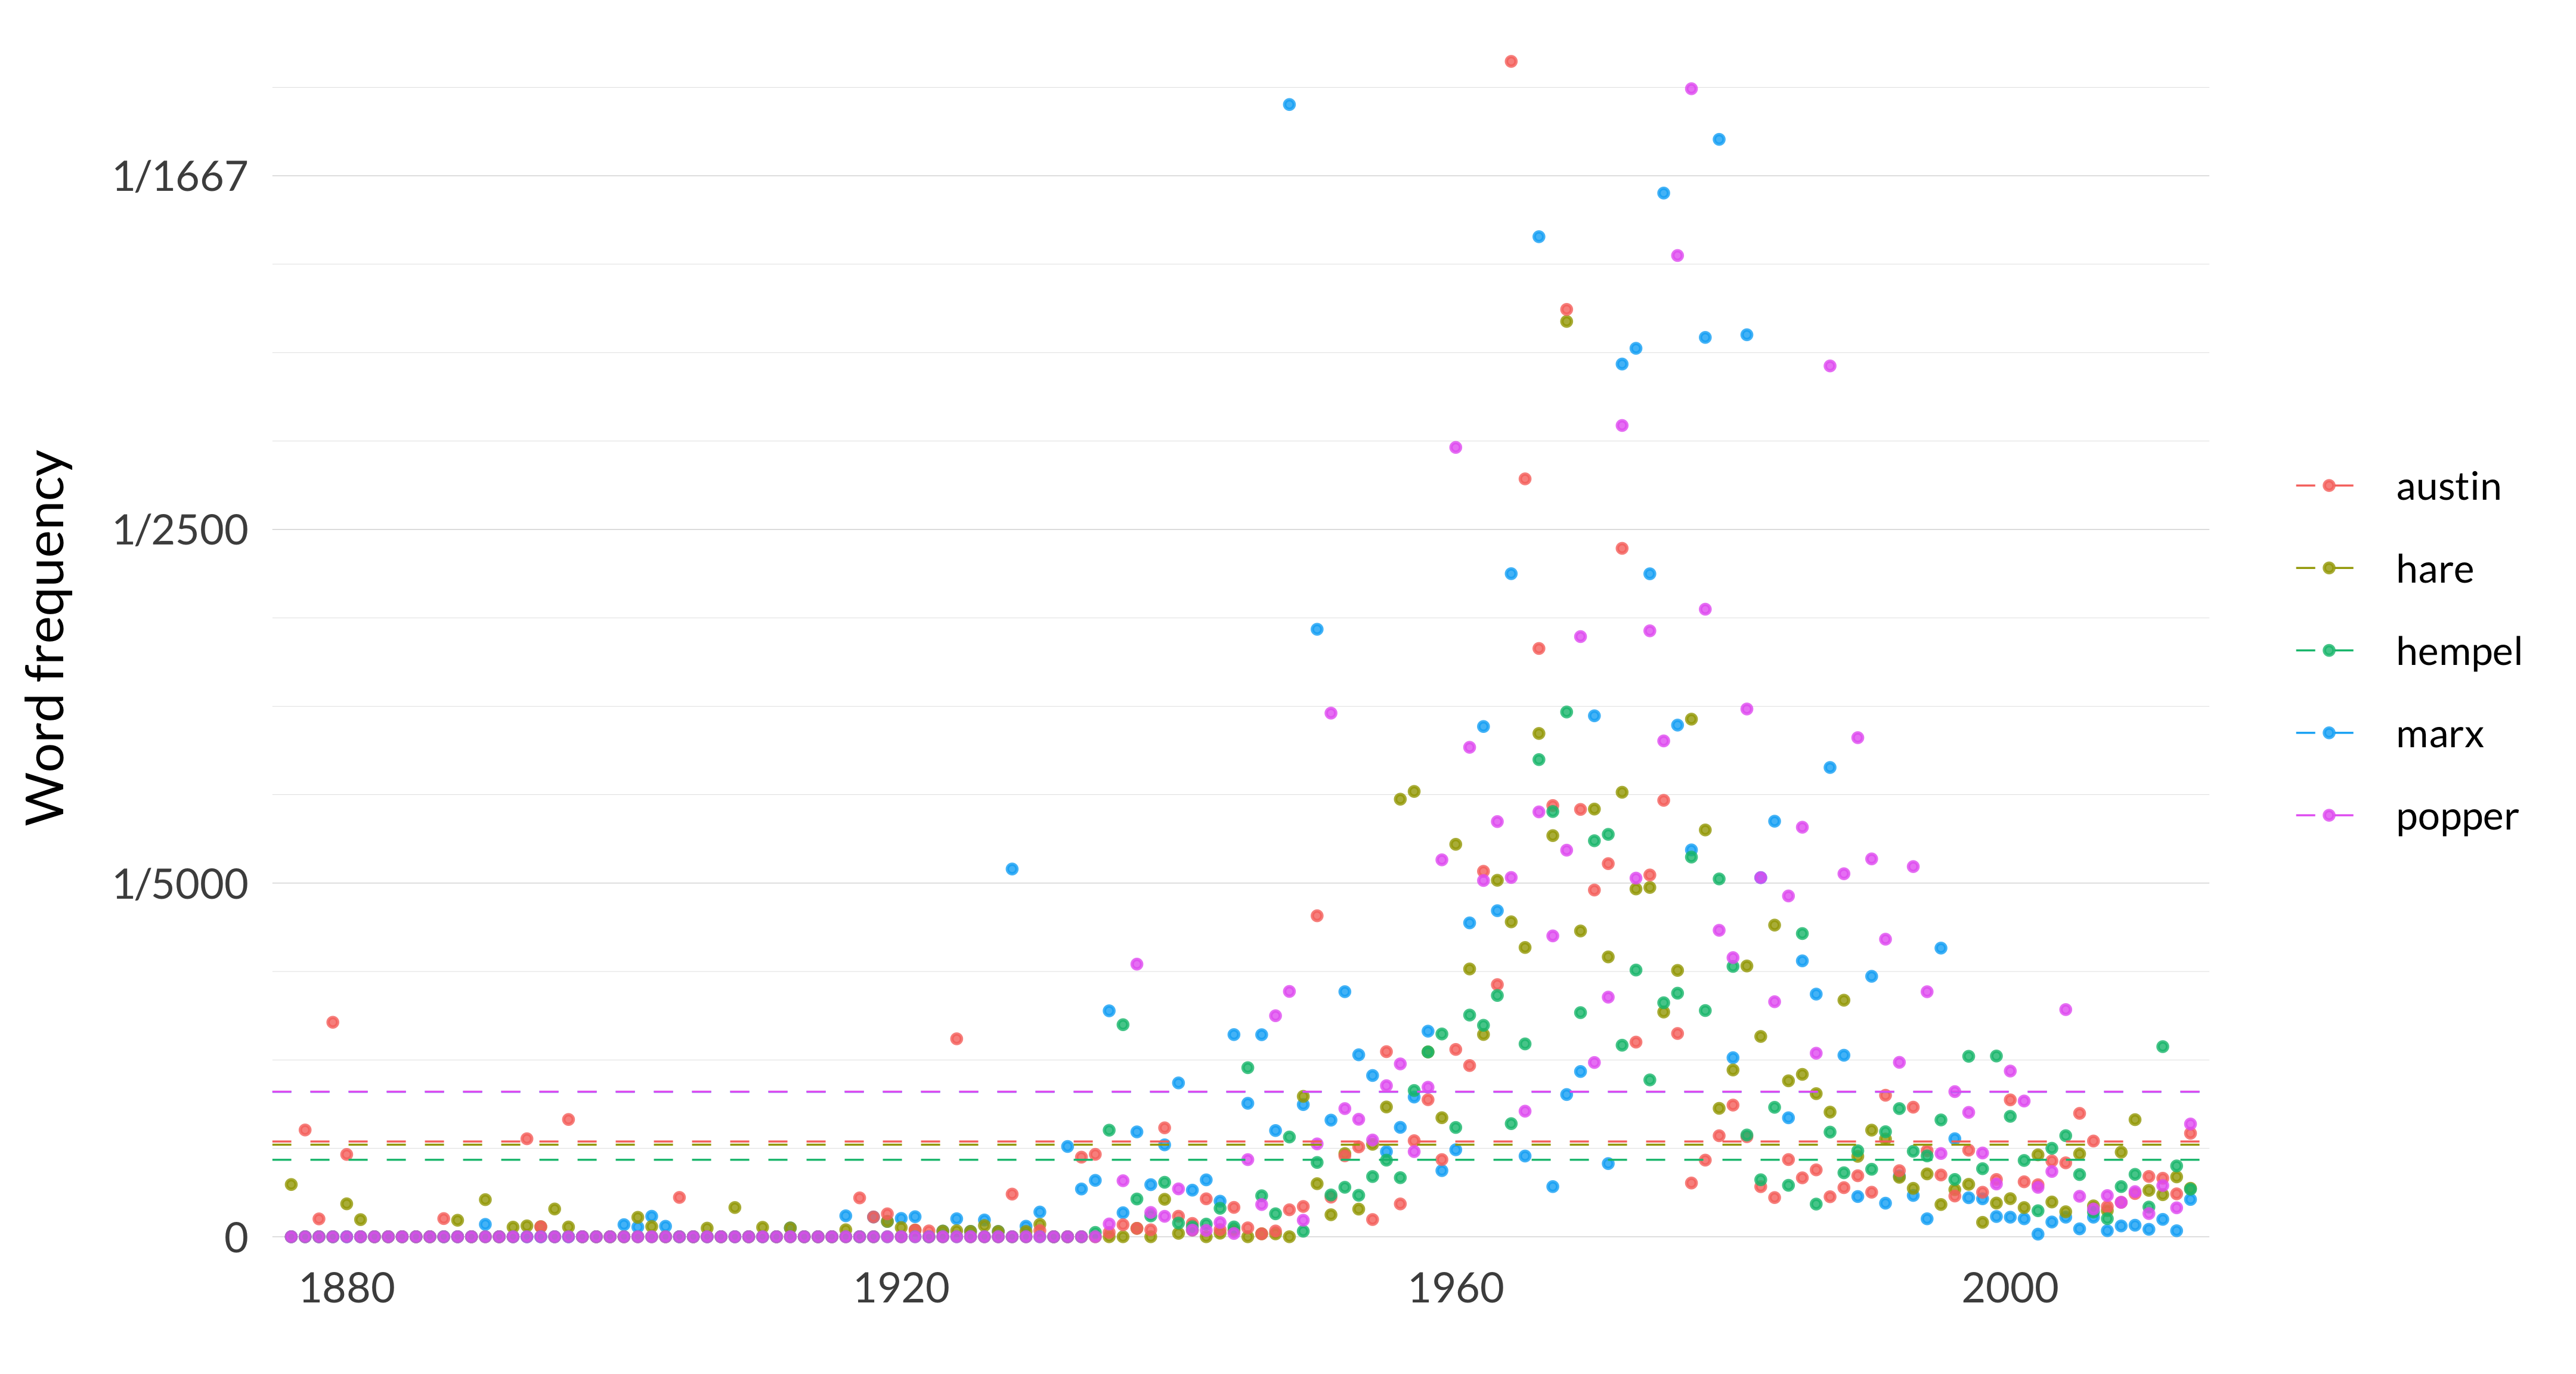 A scatterplot showing the frequency of the words marx, hare, austin, hempel, popper. The word marx appears, on average across the years, 82 times per million words, and in the median year, it appears 13 times per million words. Its most frequent occurrence is in 1948 when it appears 640 times per million words, and its least frequent occurrence is in 1876 when it appears 0 times per million words. The word hare appears, on average across the years, 52 times per million words, and in the median year, it appears 13 times per million words. Its most frequent occurrence is in 1968 when it appears 518 times per million words, and its least frequent occurrence is in 1877 when it appears 0 times per million words. The word austin appears, on average across the years, 54 times per million words, and in the median year, it appears 22 times per million words. Its most frequent occurrence is in 1964 when it appears 665 times per million words, and its least frequent occurrence is in 1876 when it appears 0 times per million words. The word hempel appears, on average across the years, 44 times per million words, and in the median year, it appears 16 times per million words. Its most frequent occurrence is in 1968 when it appears 297 times per million words, and its least frequent occurrence is in 1876 when it appears 0 times per million words. The word popper appears, on average across the years, 82 times per million words, and in the median year, it appears 16 times per million words. Its most frequent occurrence is in 1977 when it appears 649 times per million words, and its least frequent occurrence is in 1876 when it appears 0 times per million words. 